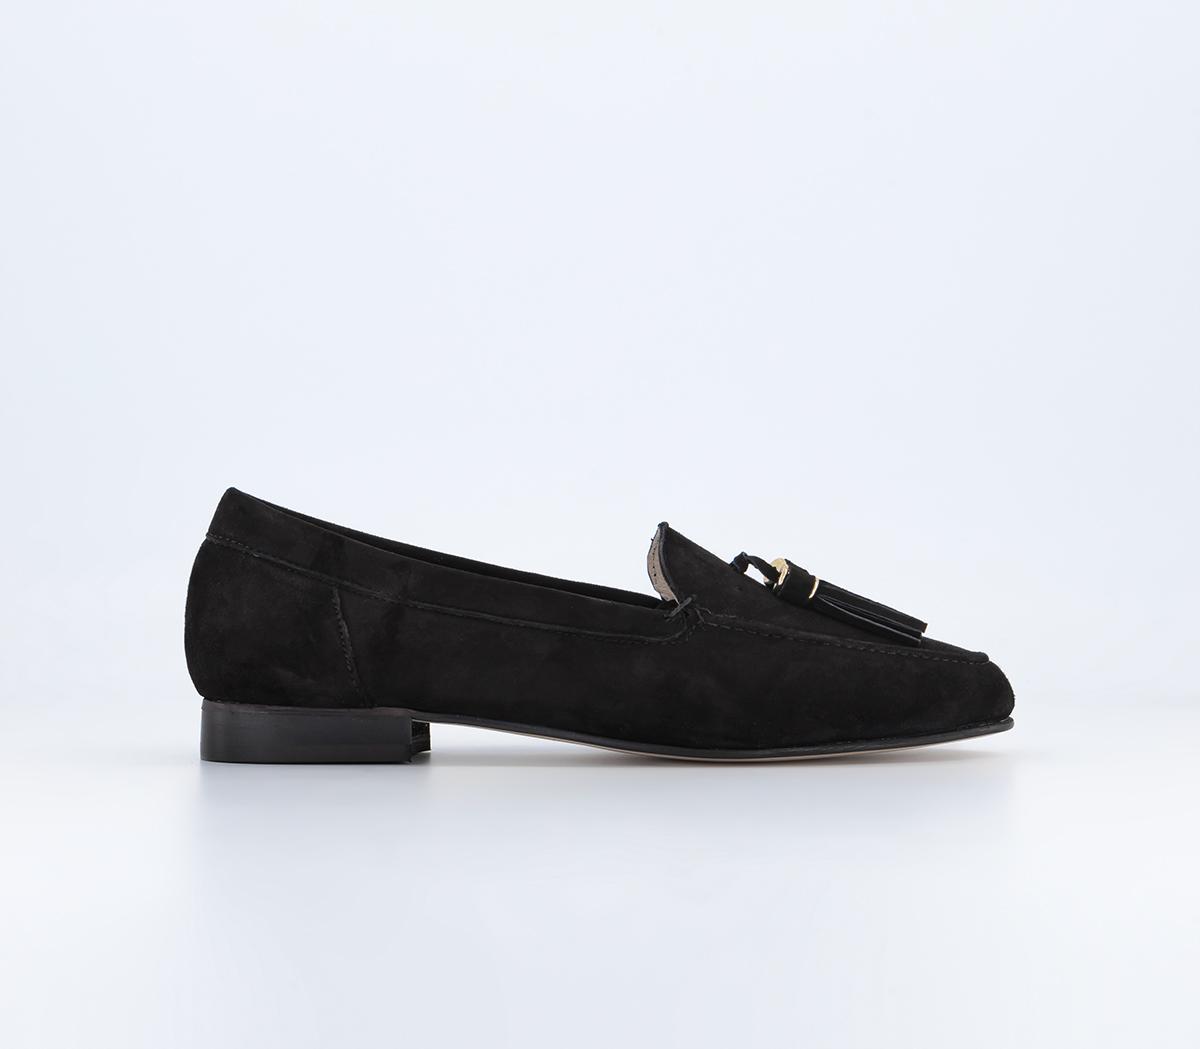 OFFICEFellow LoafersBlack Suede